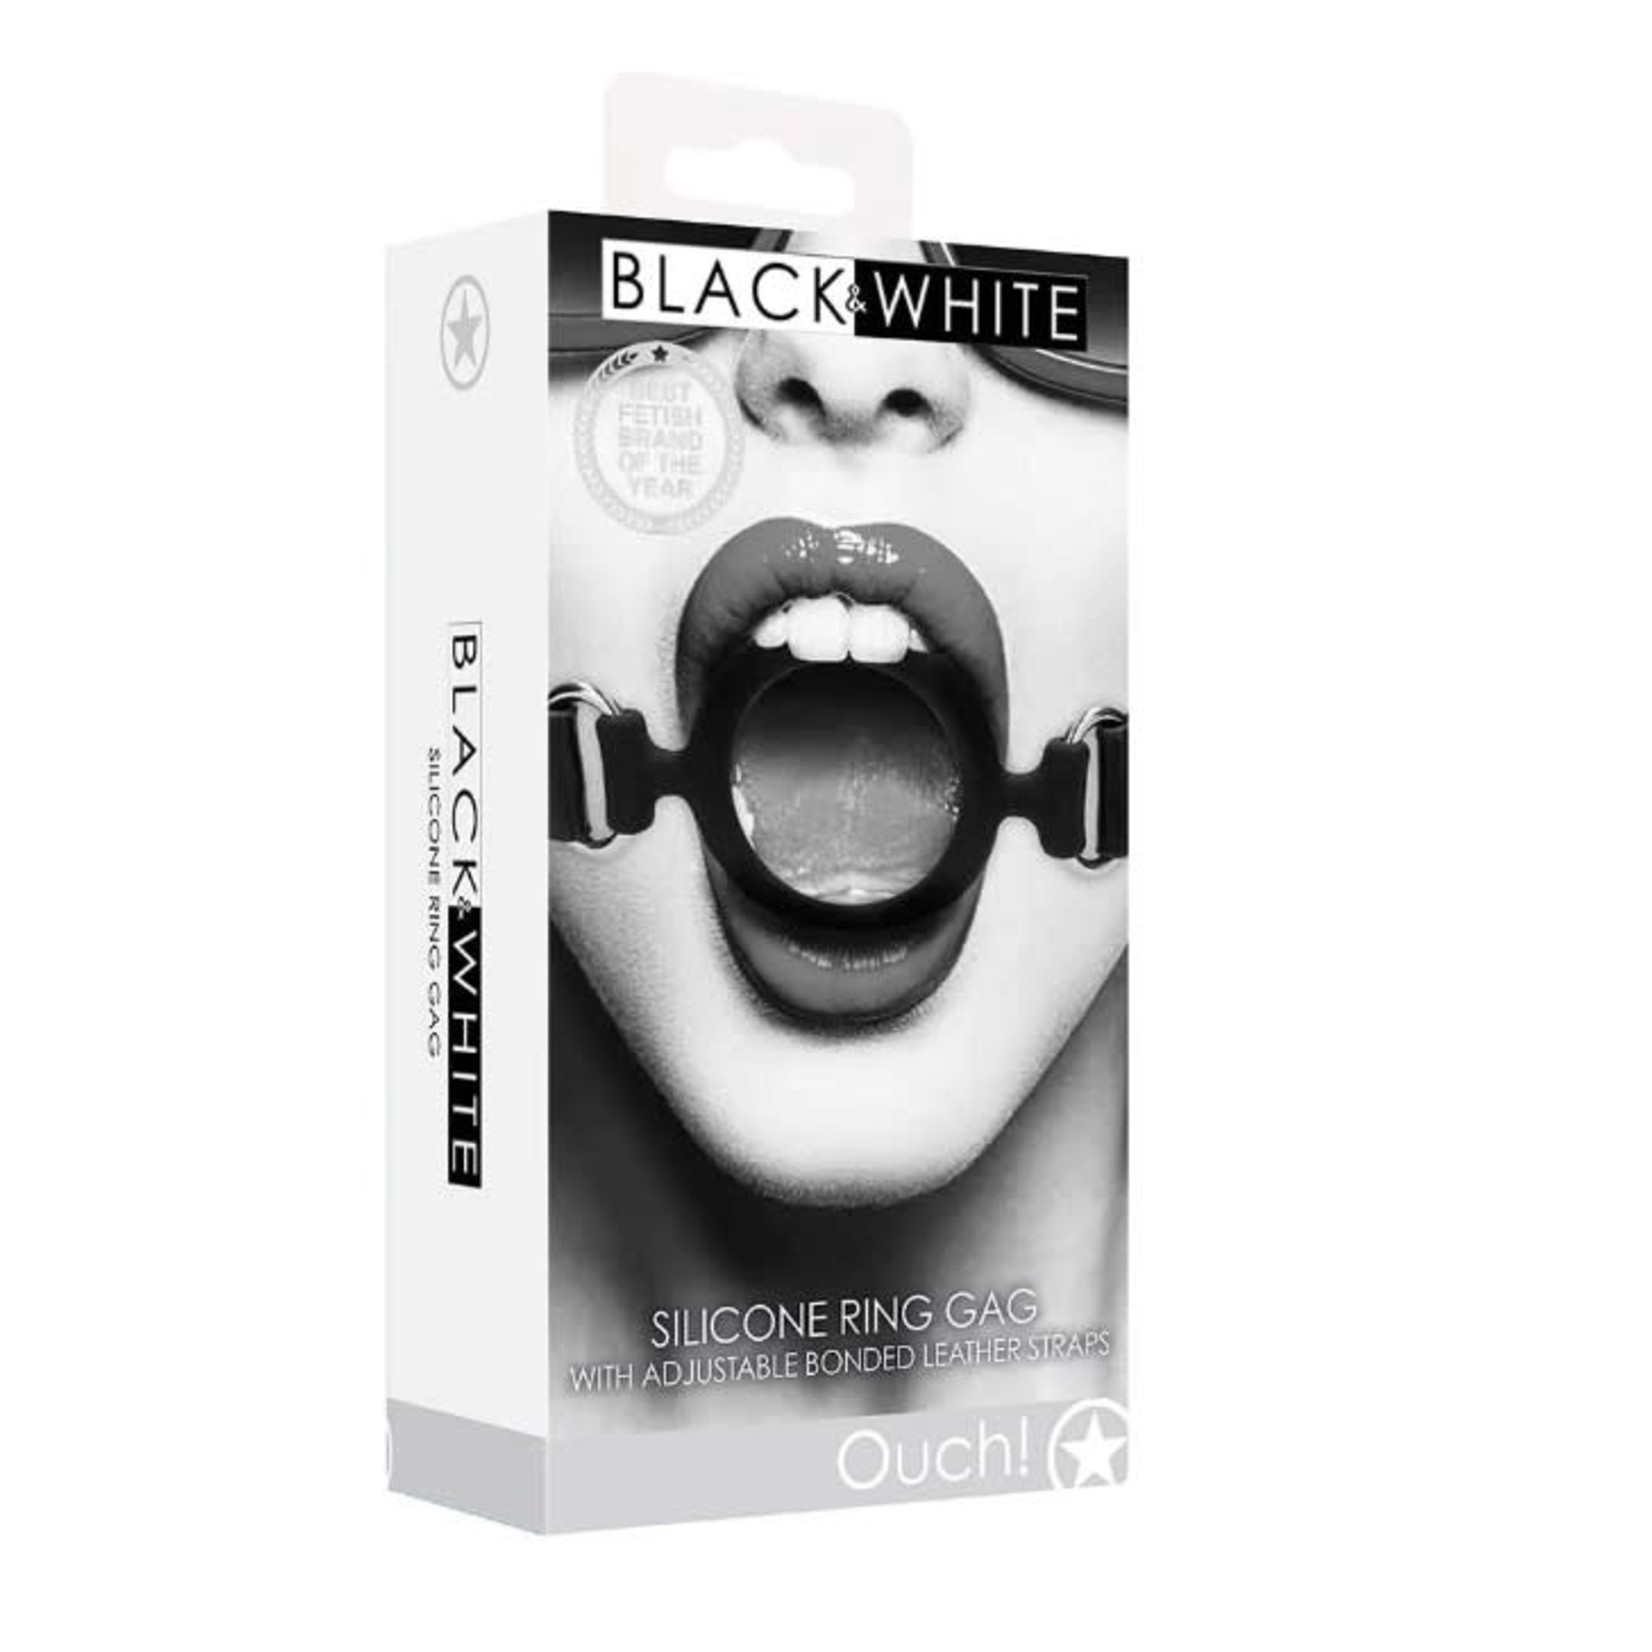 OUCH OUCH! BLACK & WHITE STRAPPED SILICONE RING GAG